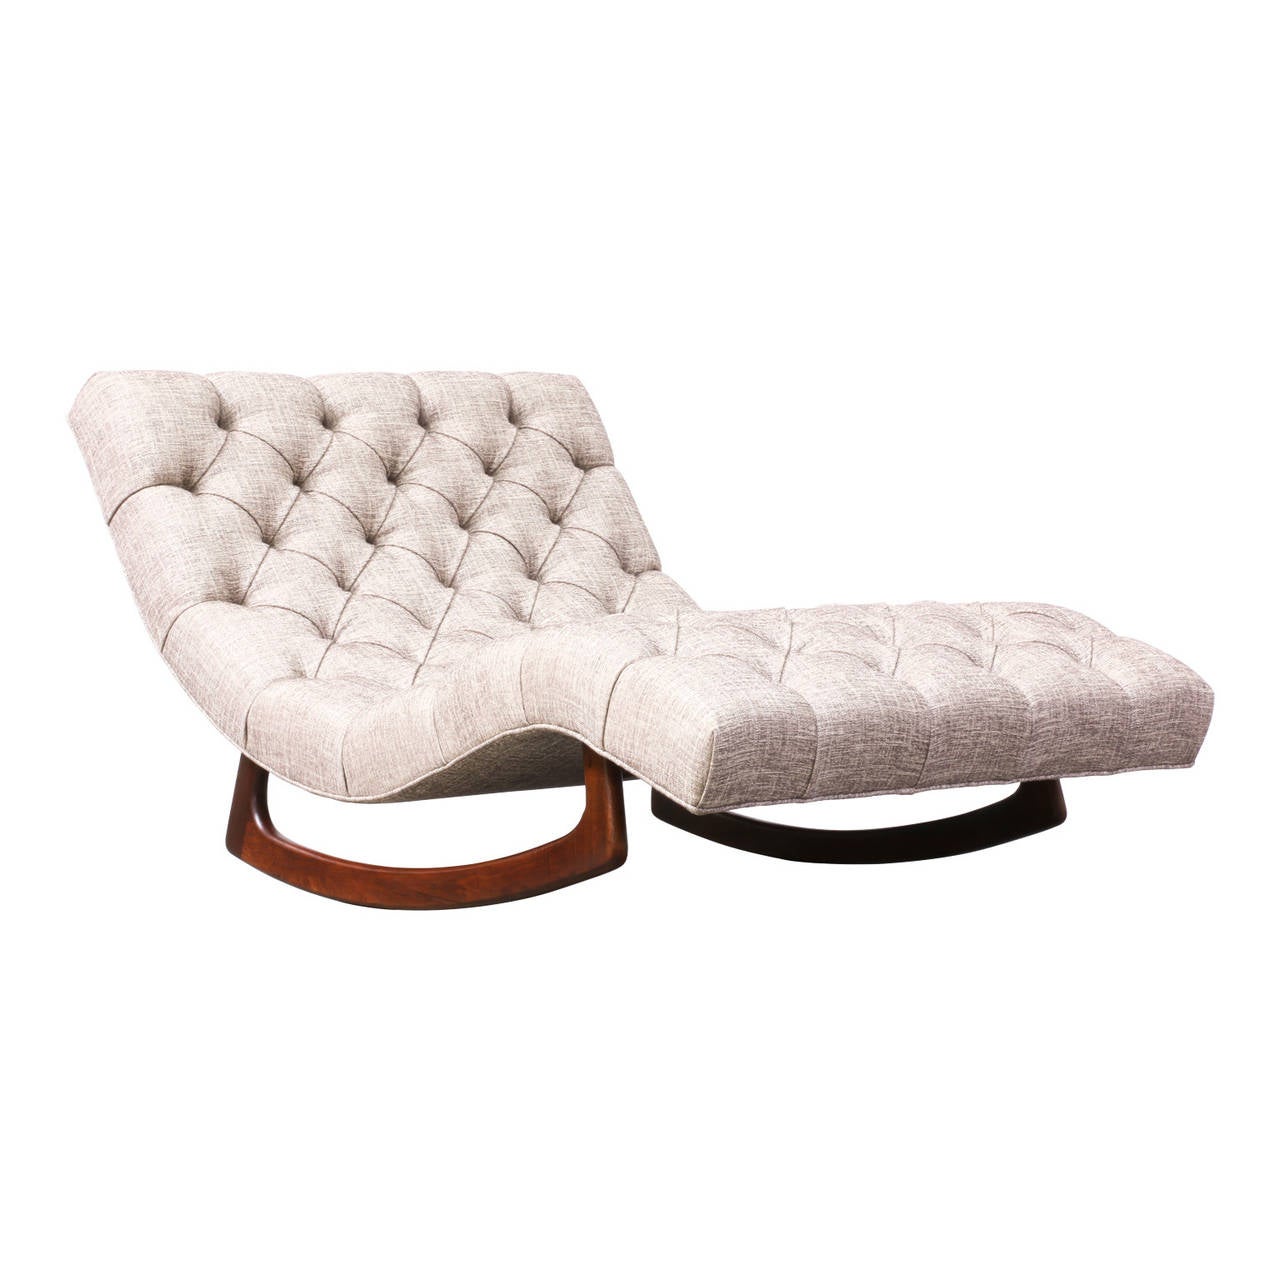 Mid-Century Modern Adrian Pearsall Chaise Longue for Craft Associates